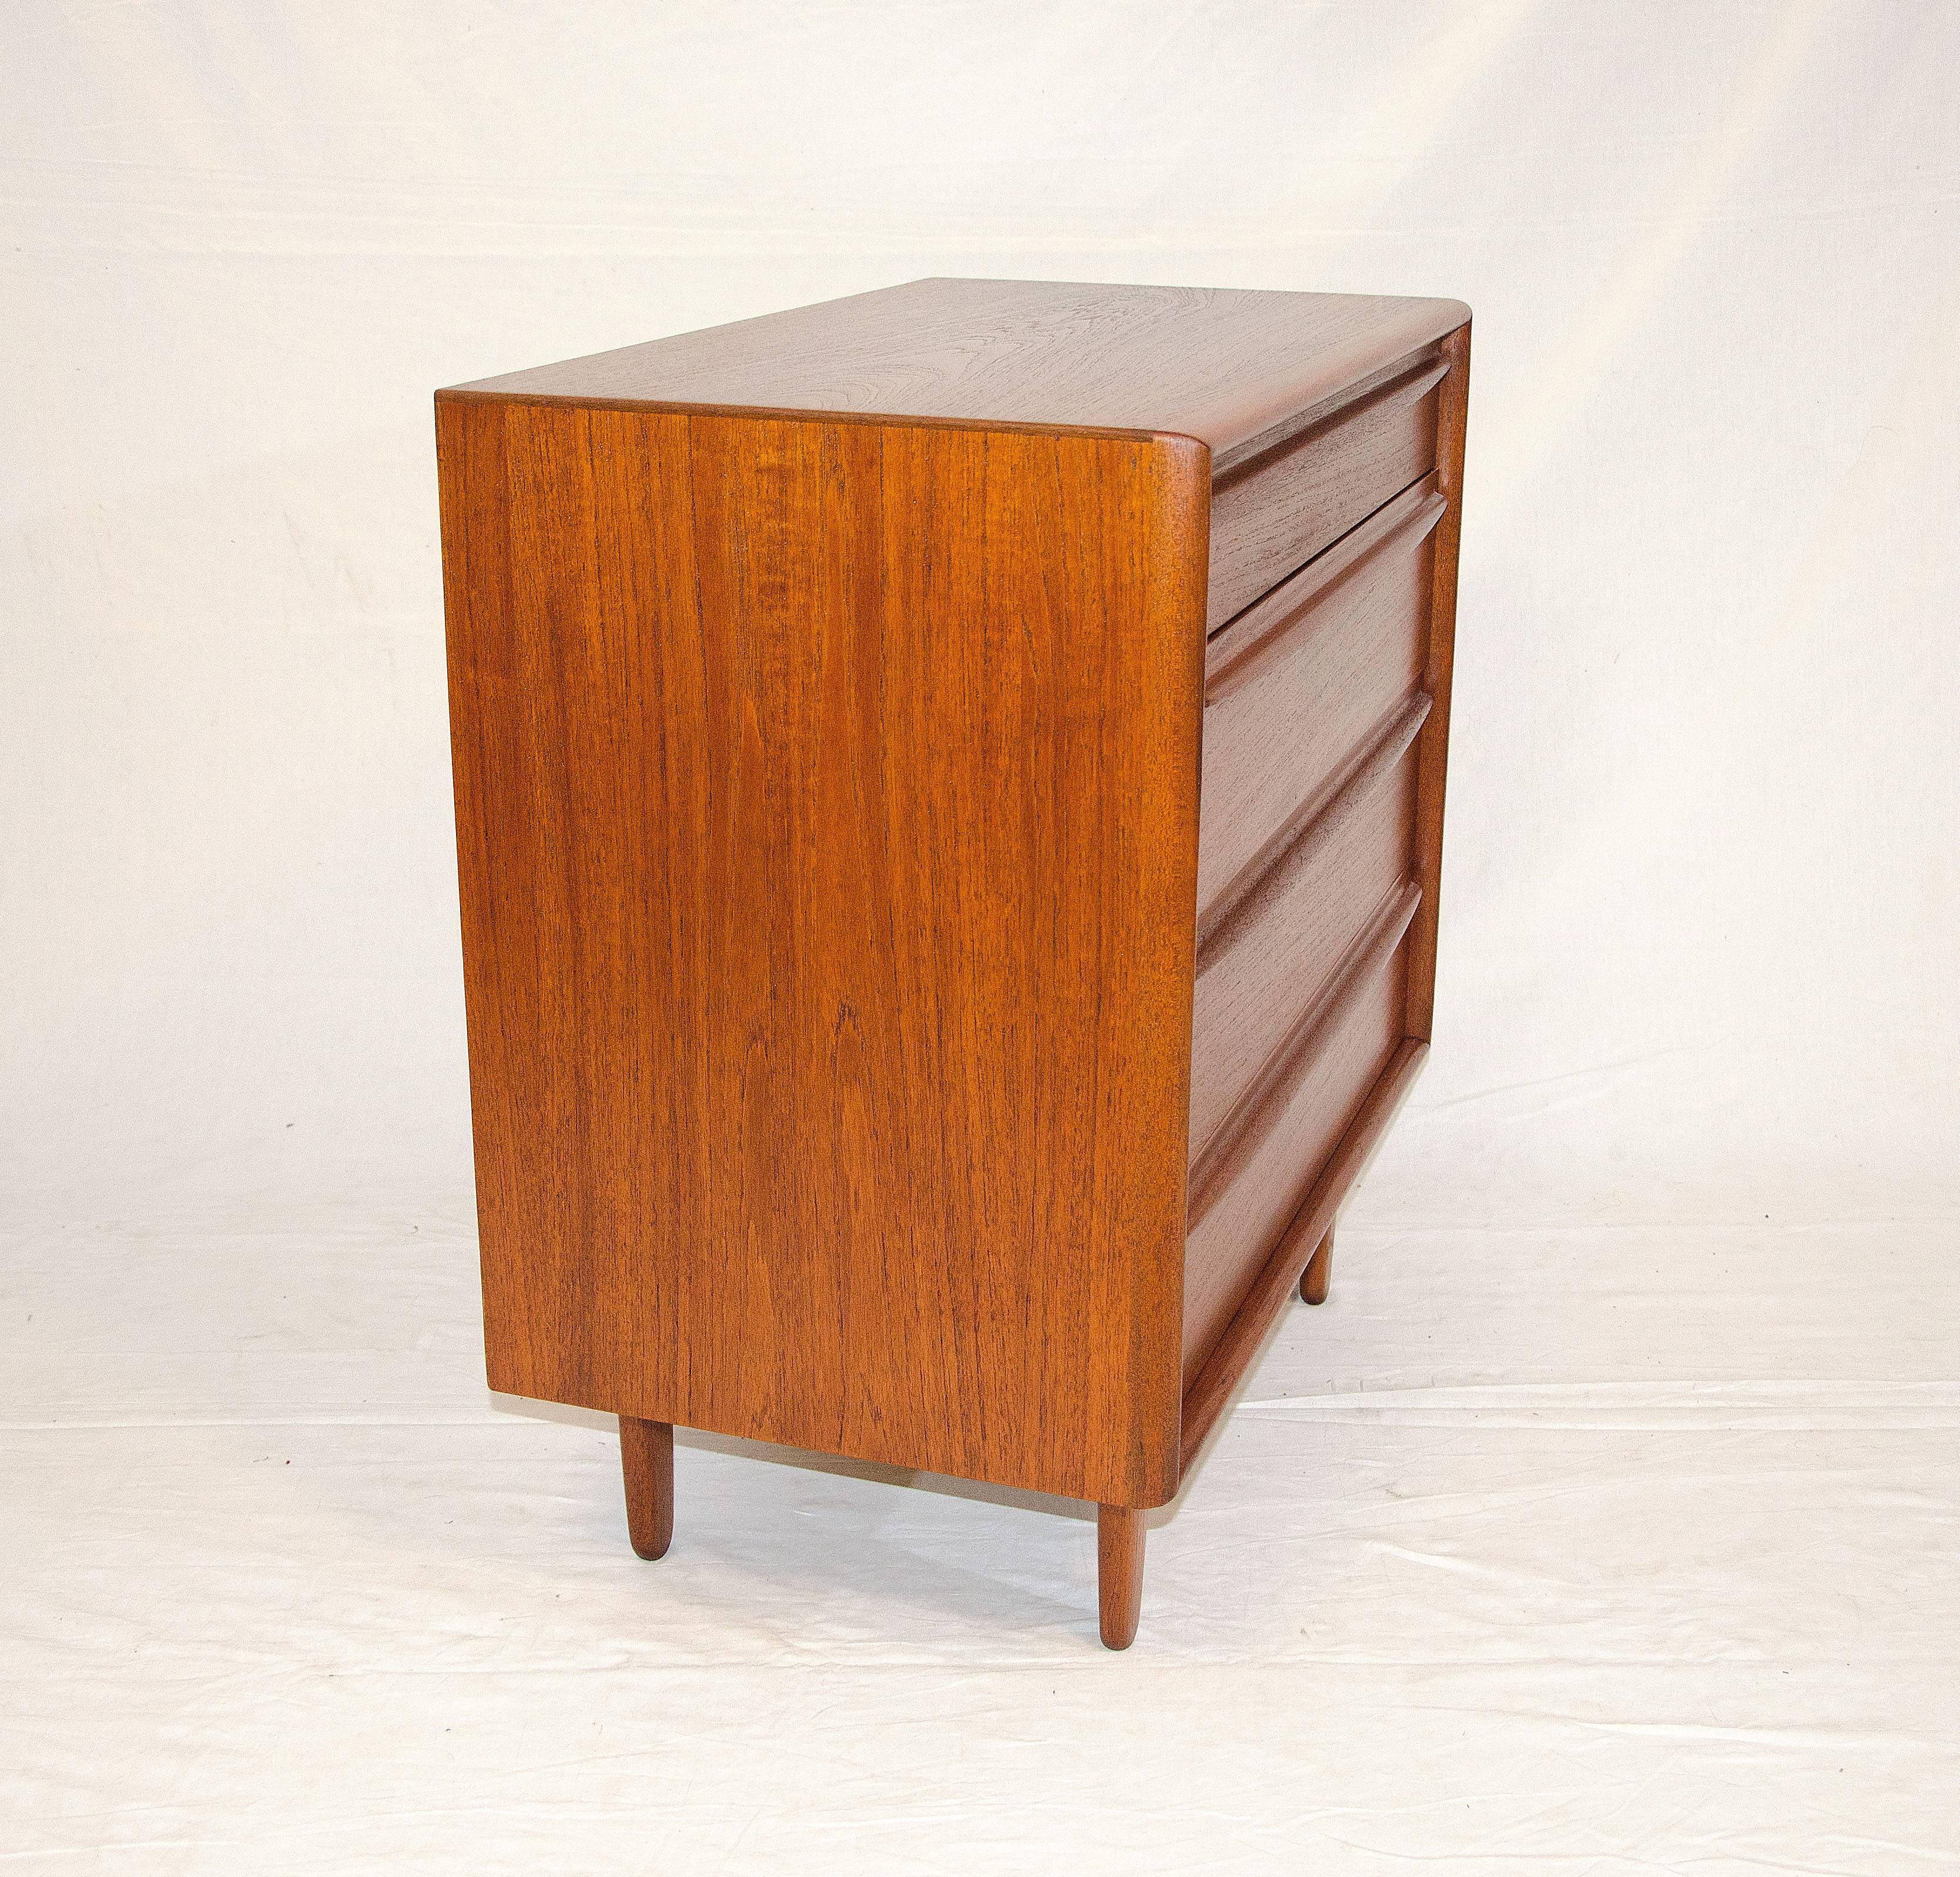 Small Danish Teak Dresser or Chest by Svend Madsen for Falster Møbelfabrik In Excellent Condition For Sale In Crockett, CA